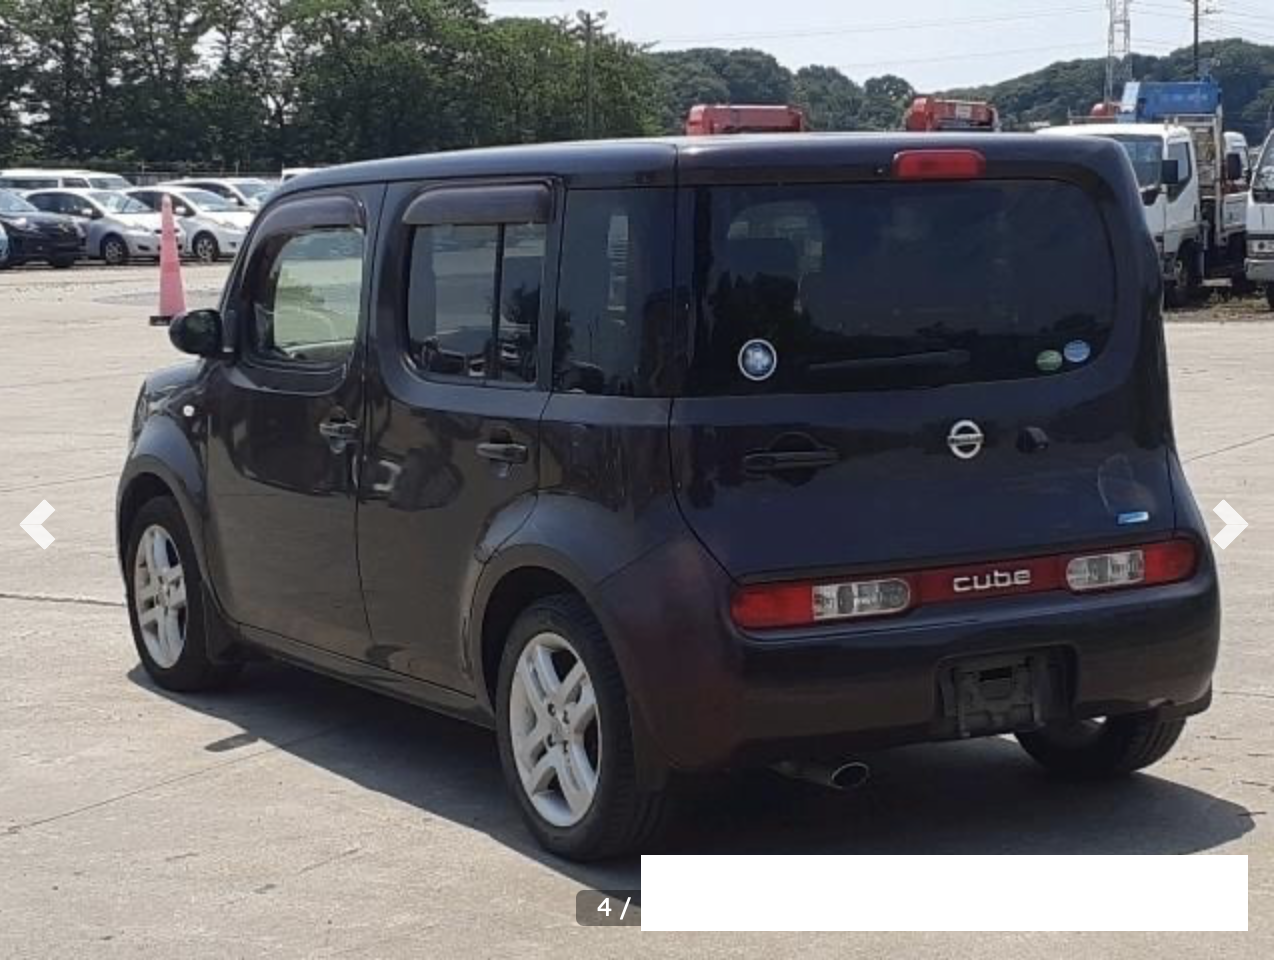 Nissan cube and nissan cubic supplied for sale fully UK registered direct from Japan with V5 and Mot, algys autos best value Nissan cube abd nissan cubic in UK, fact!